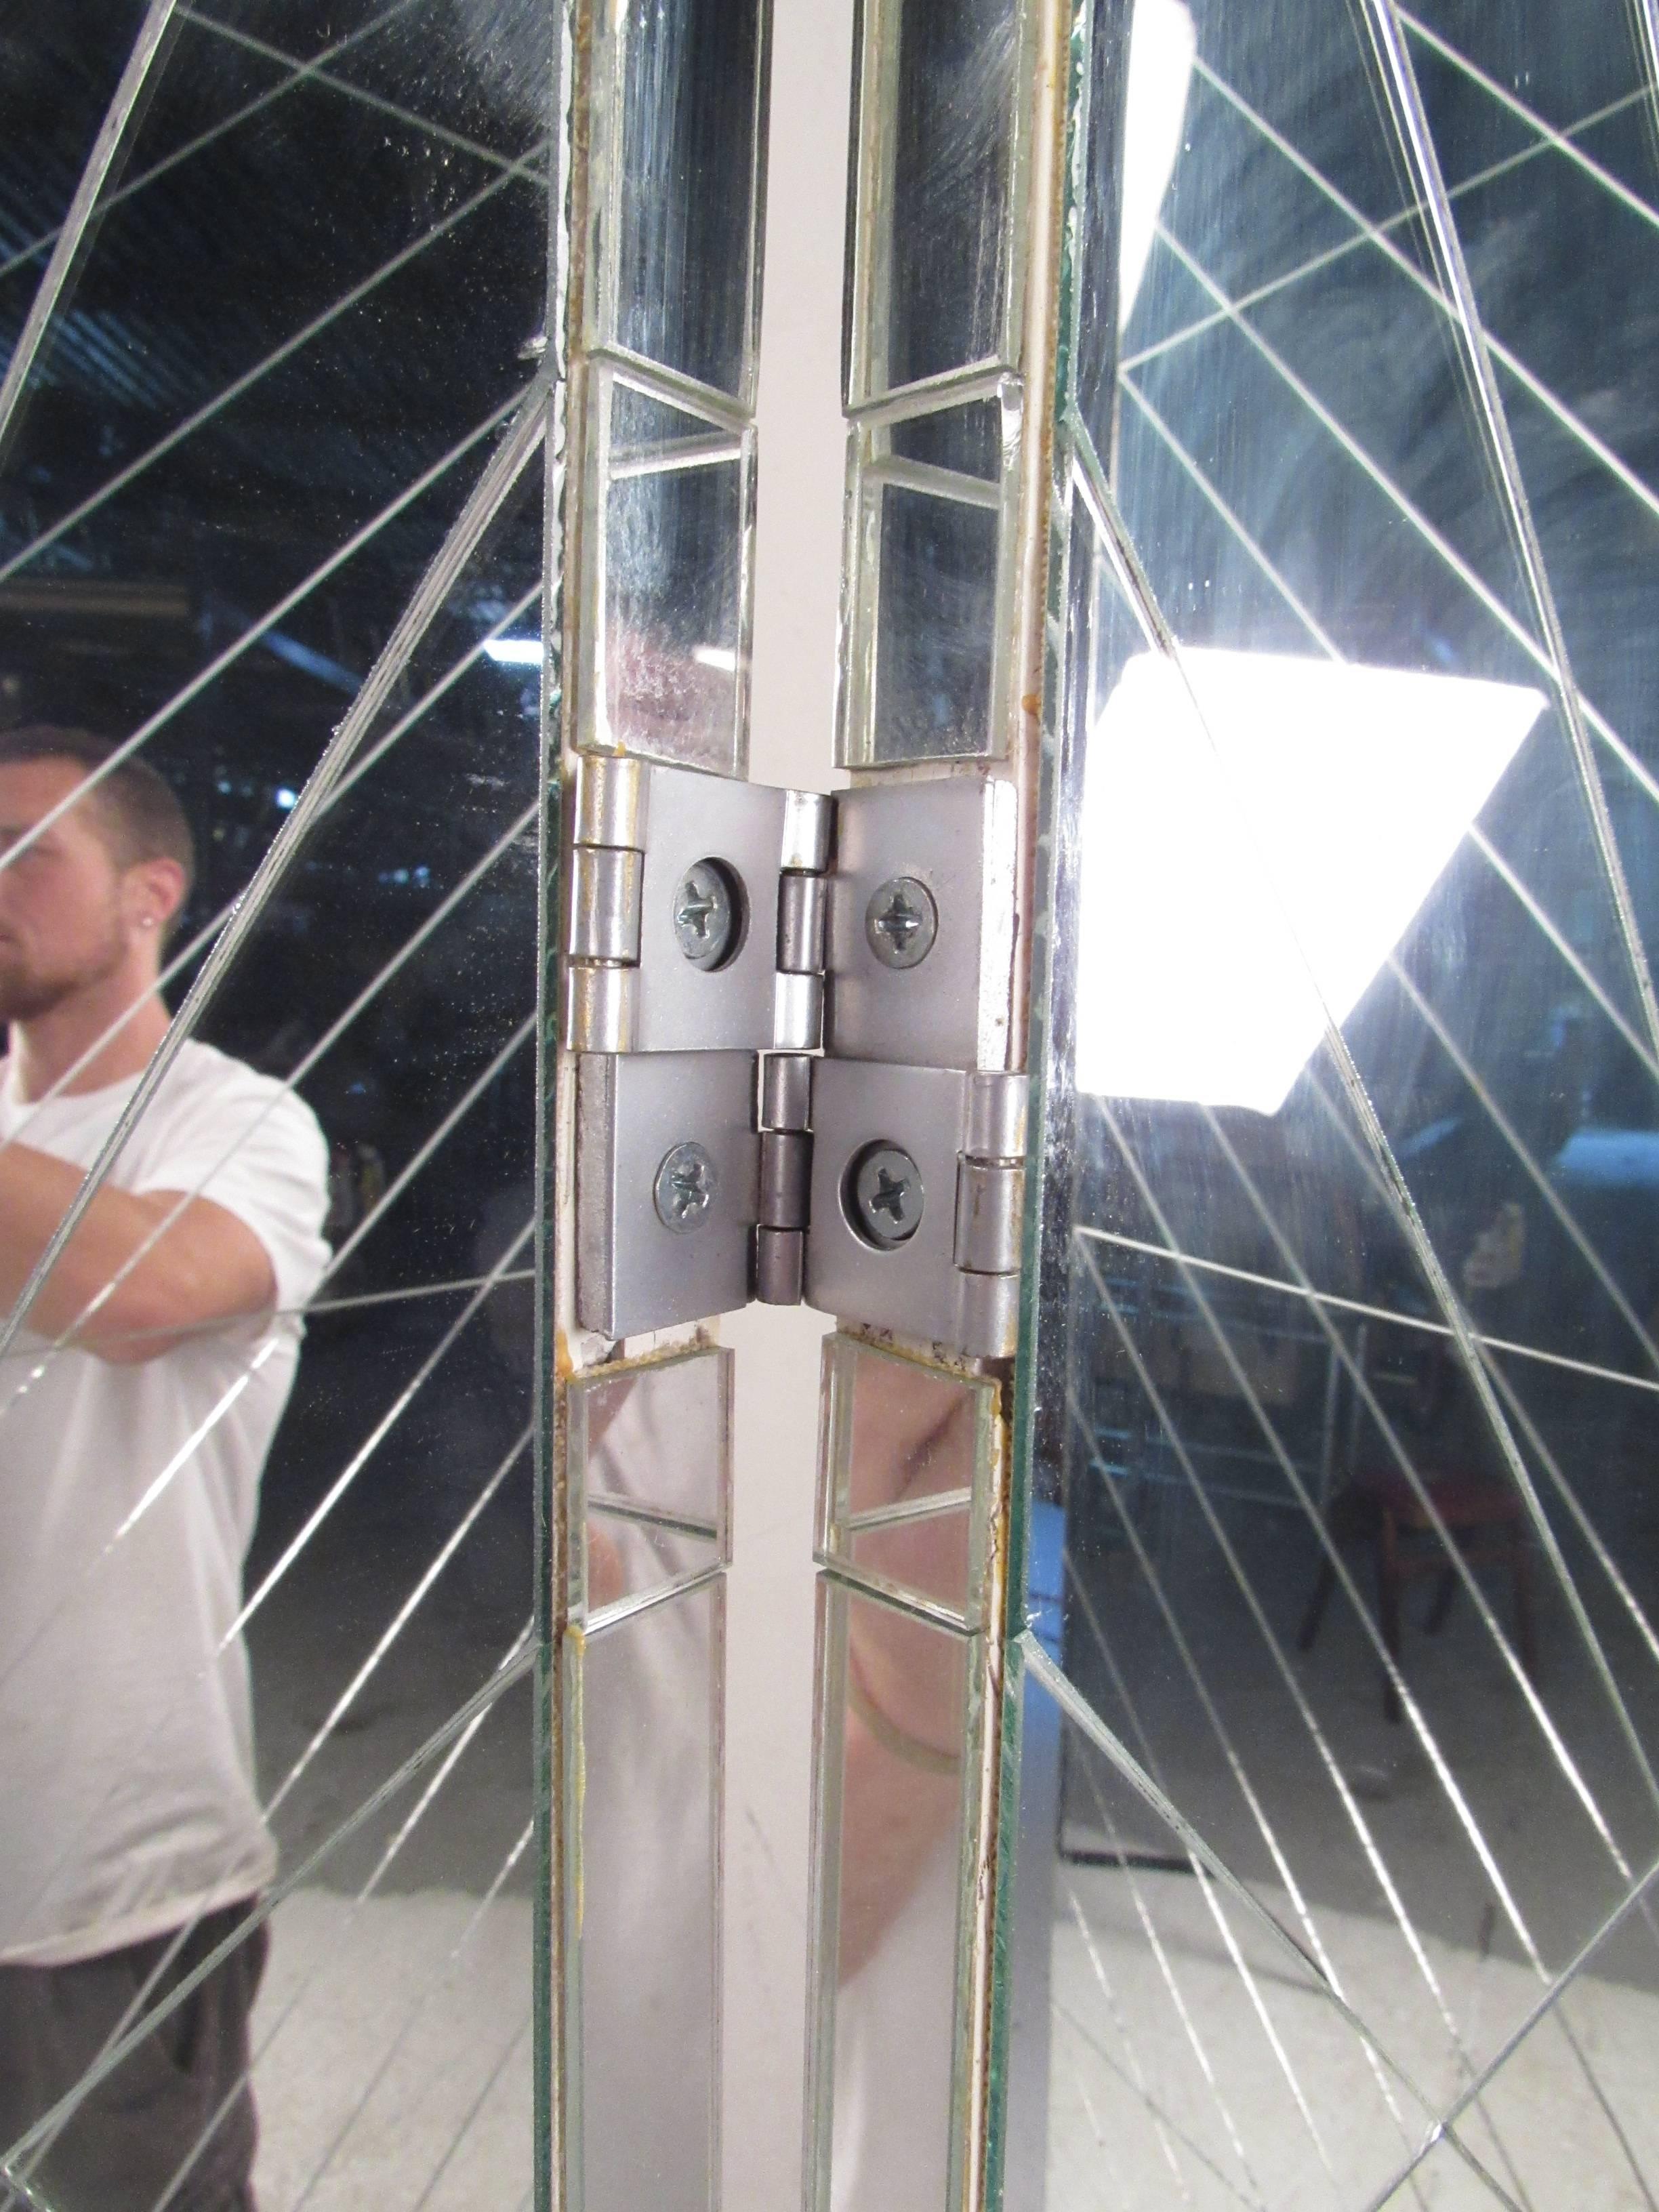 mirrored room dividers